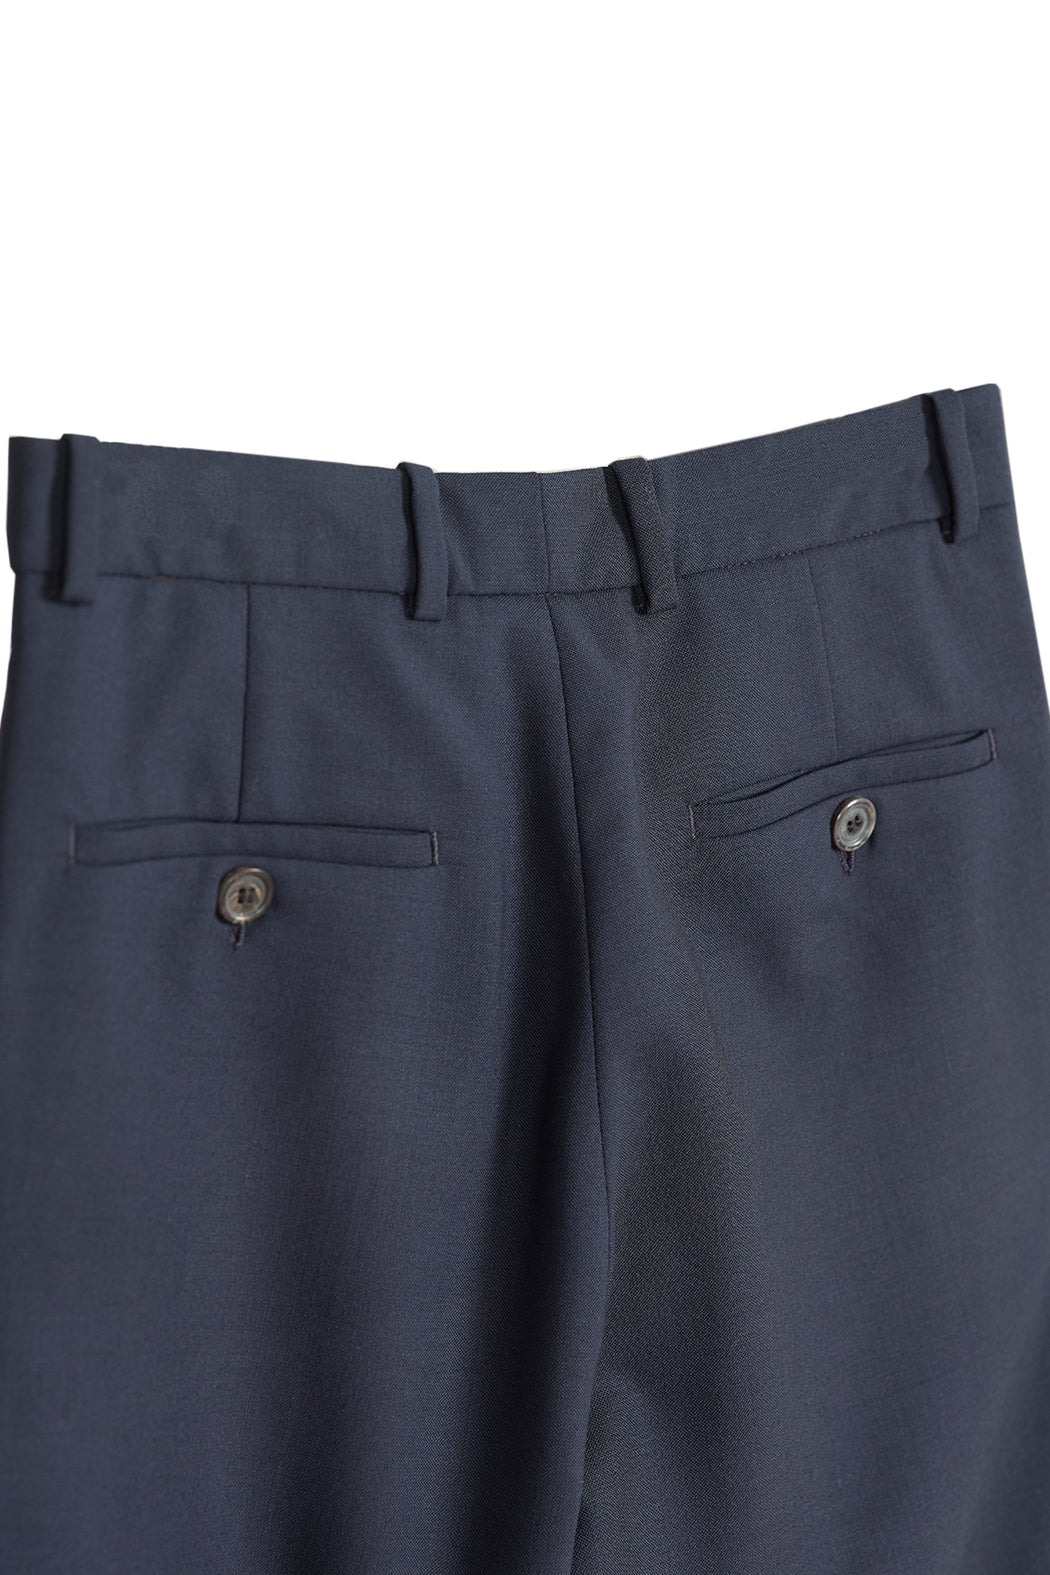 Front Panel Trousers - Dark Navy